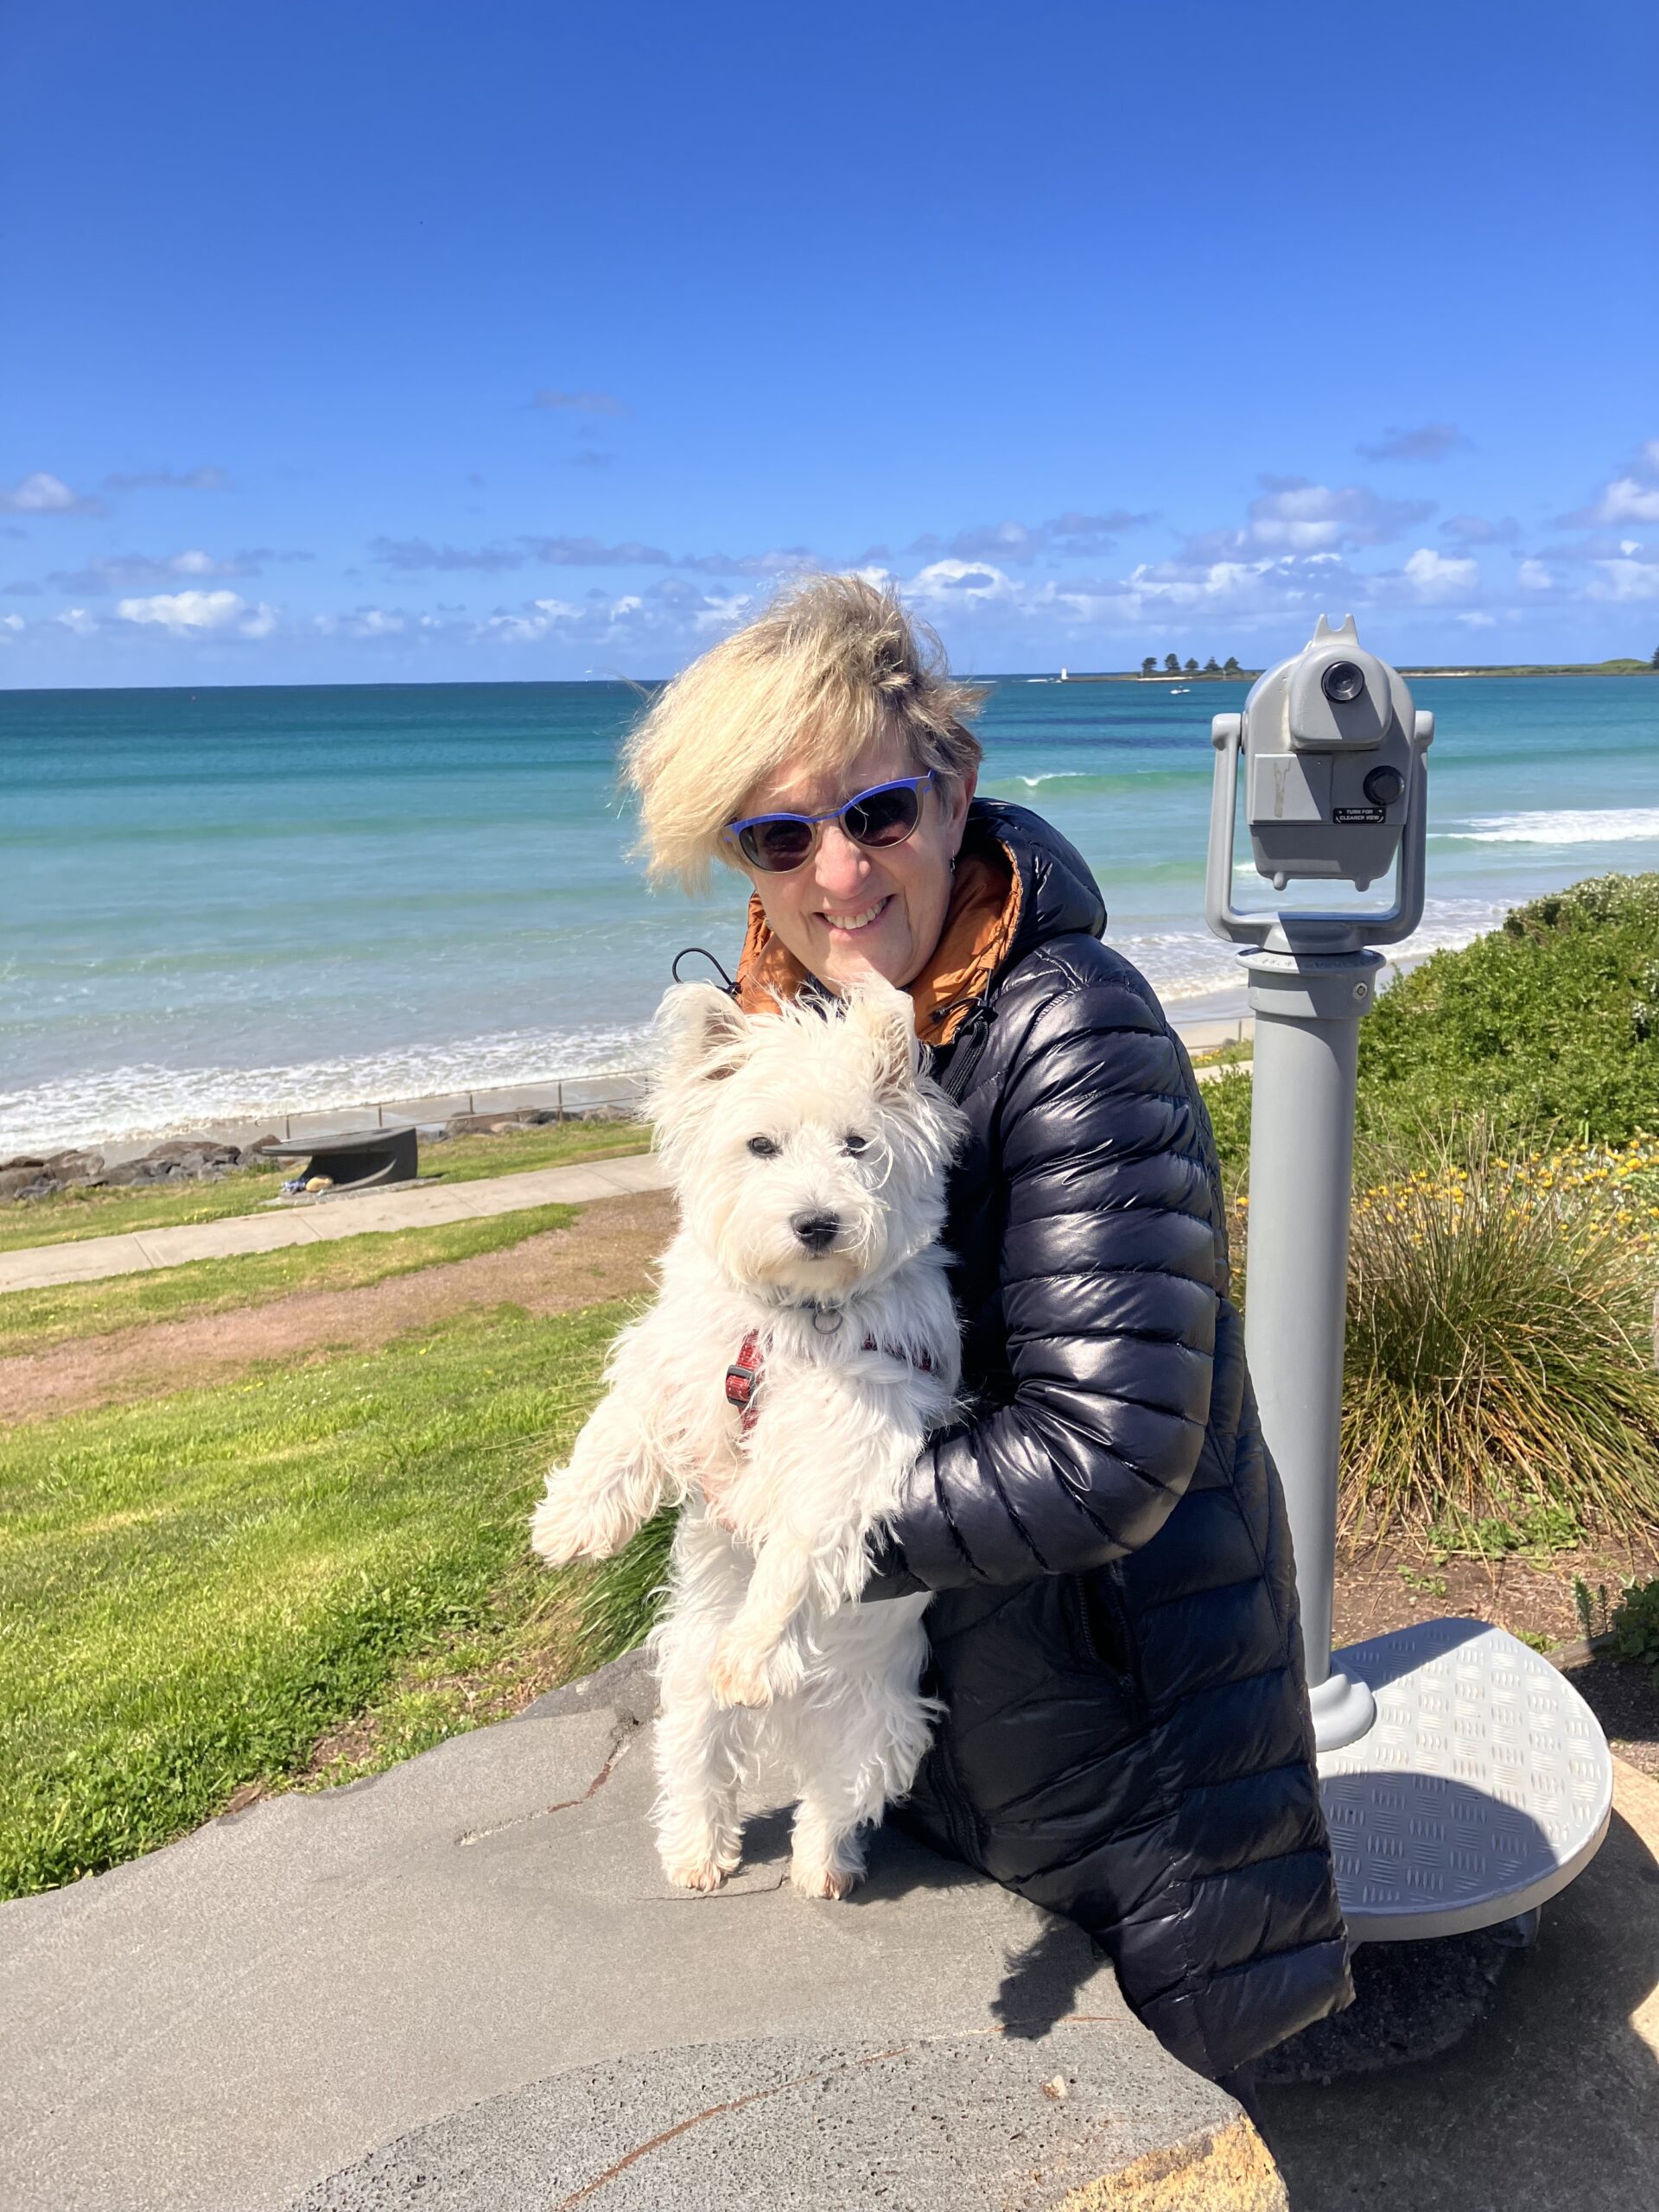 Sue is pictured at East Beach, Port Fairy, next to a lookout telescope, holding her 6 month-old white Westie puppy, Piper. She wears a black and orange overcoat and sunglasses.